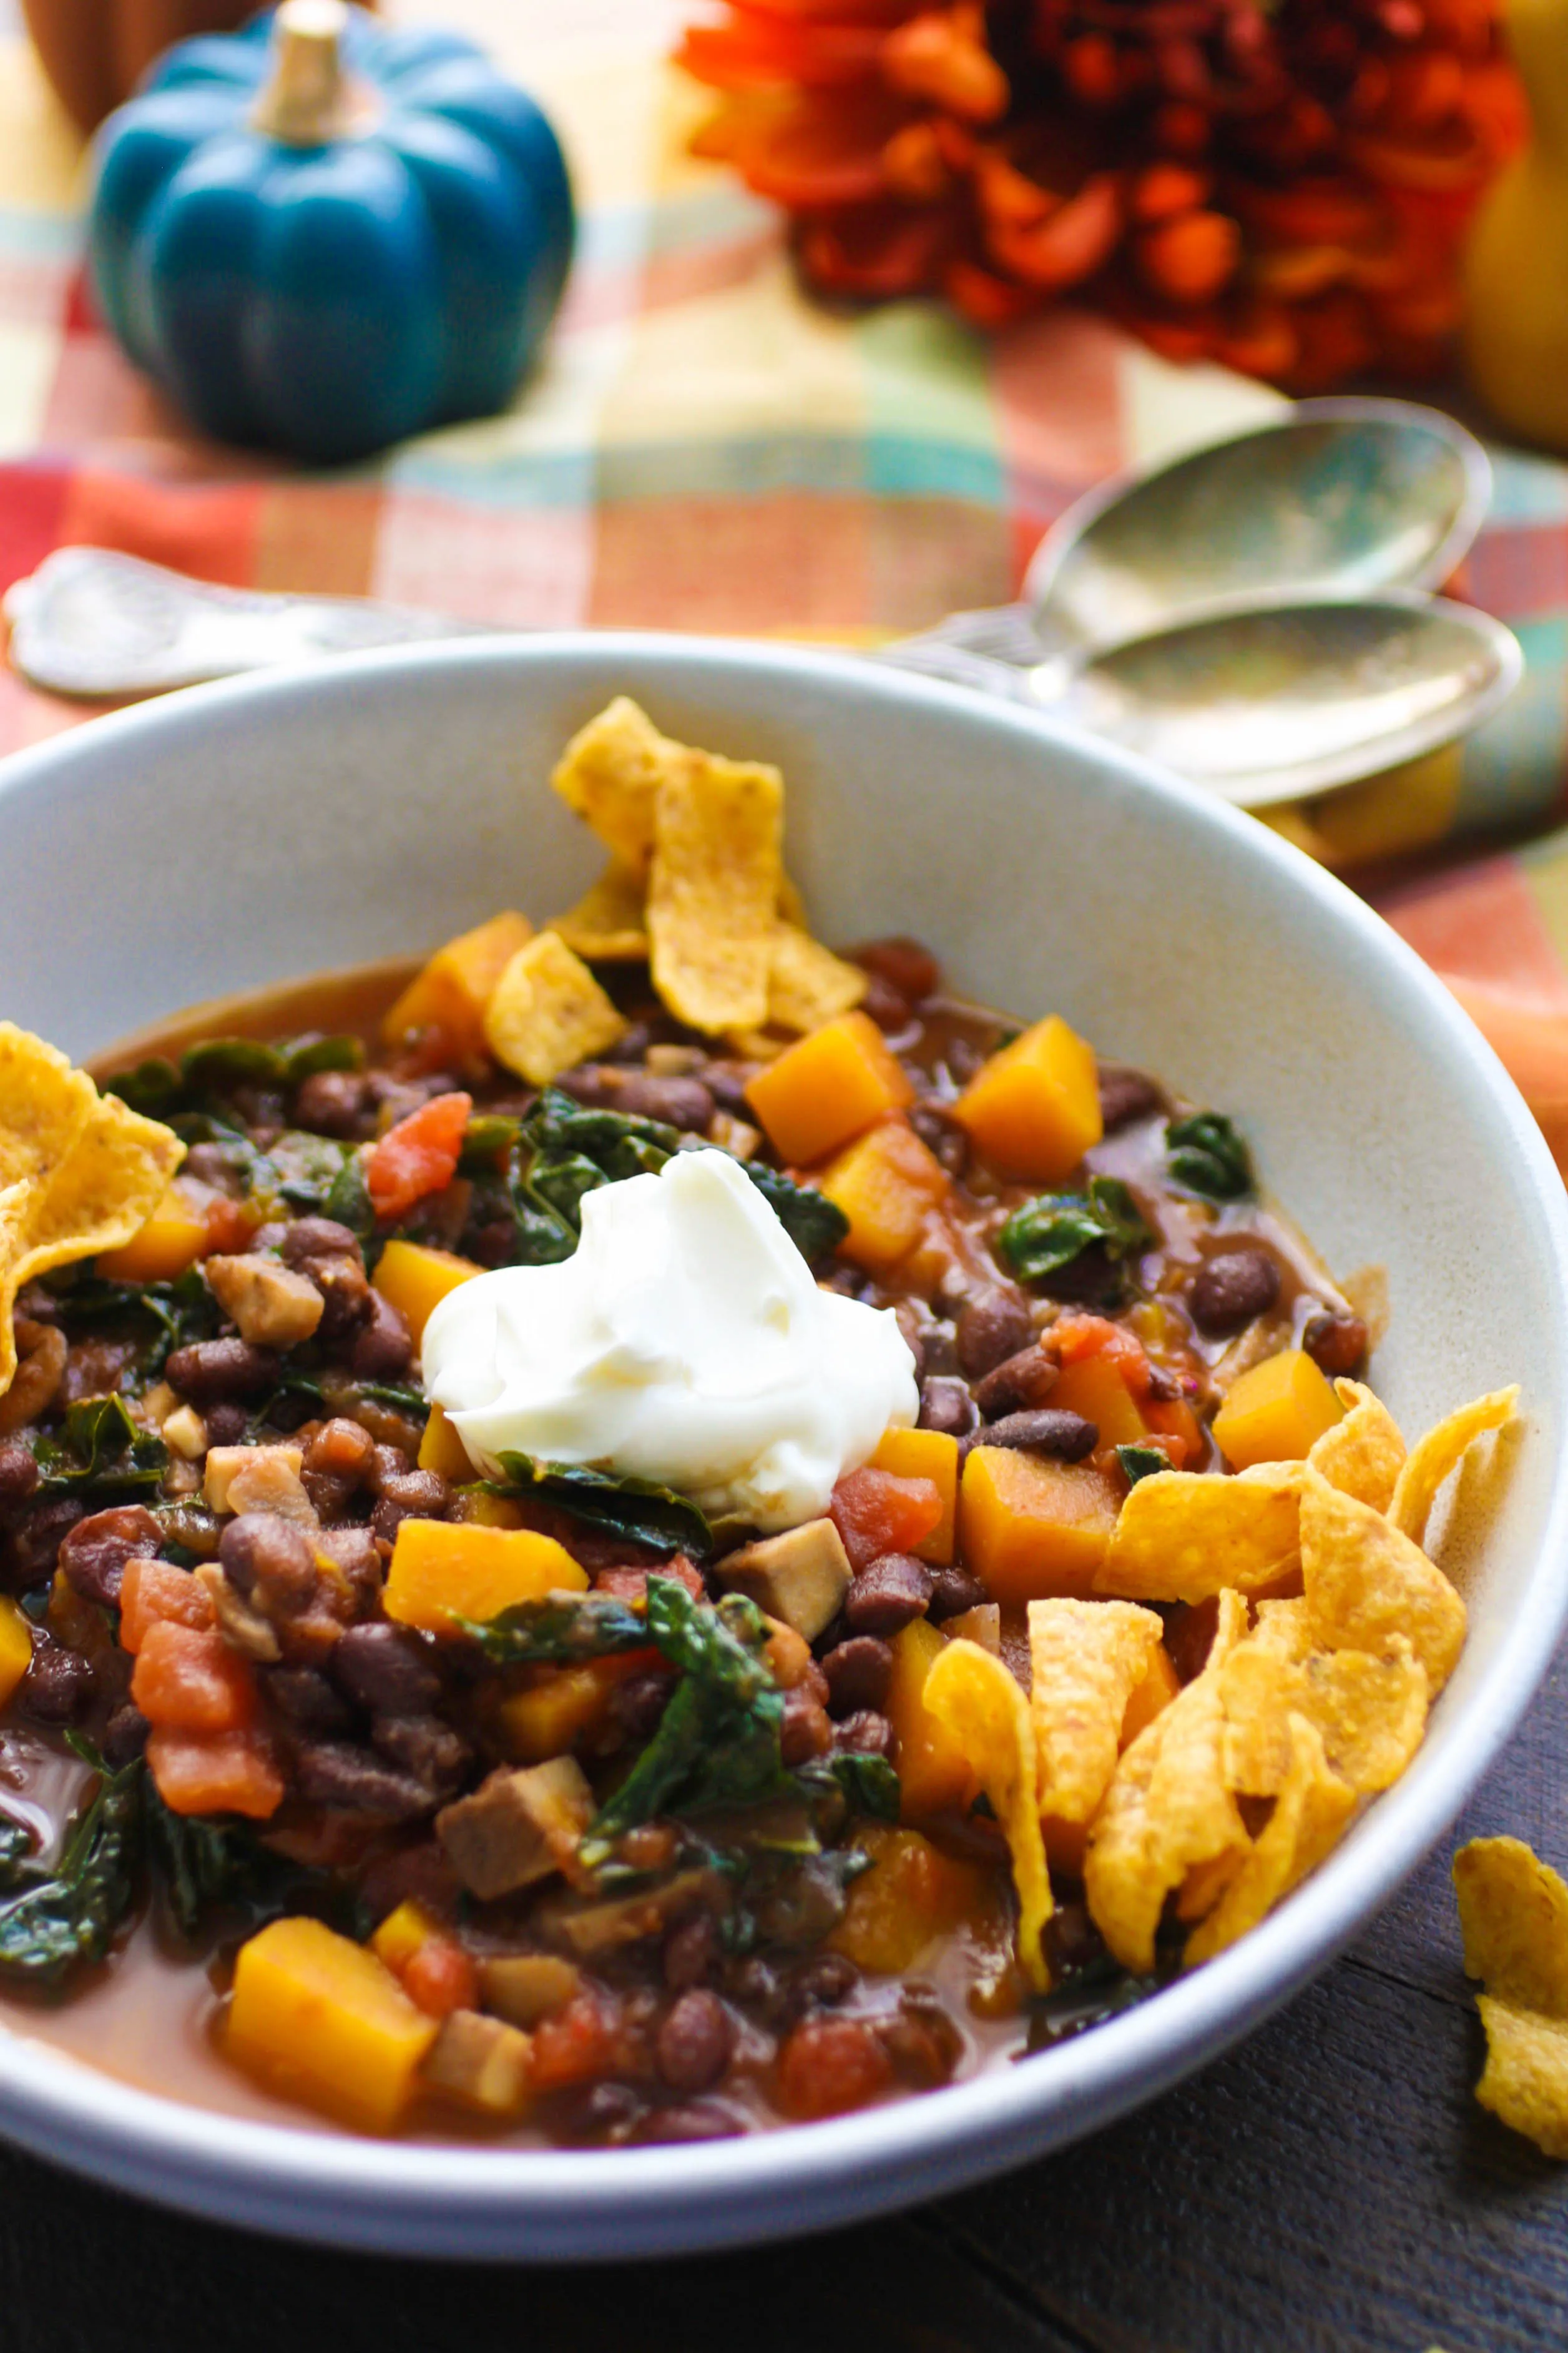 Don't forget the sour cream and corn chips for this Butternut Squash and Black Bean Chili with Mushrooms & Kale! You'll love all the ingredients in Butternut Squash and Black Bean Chili with Mushrooms & Kale.